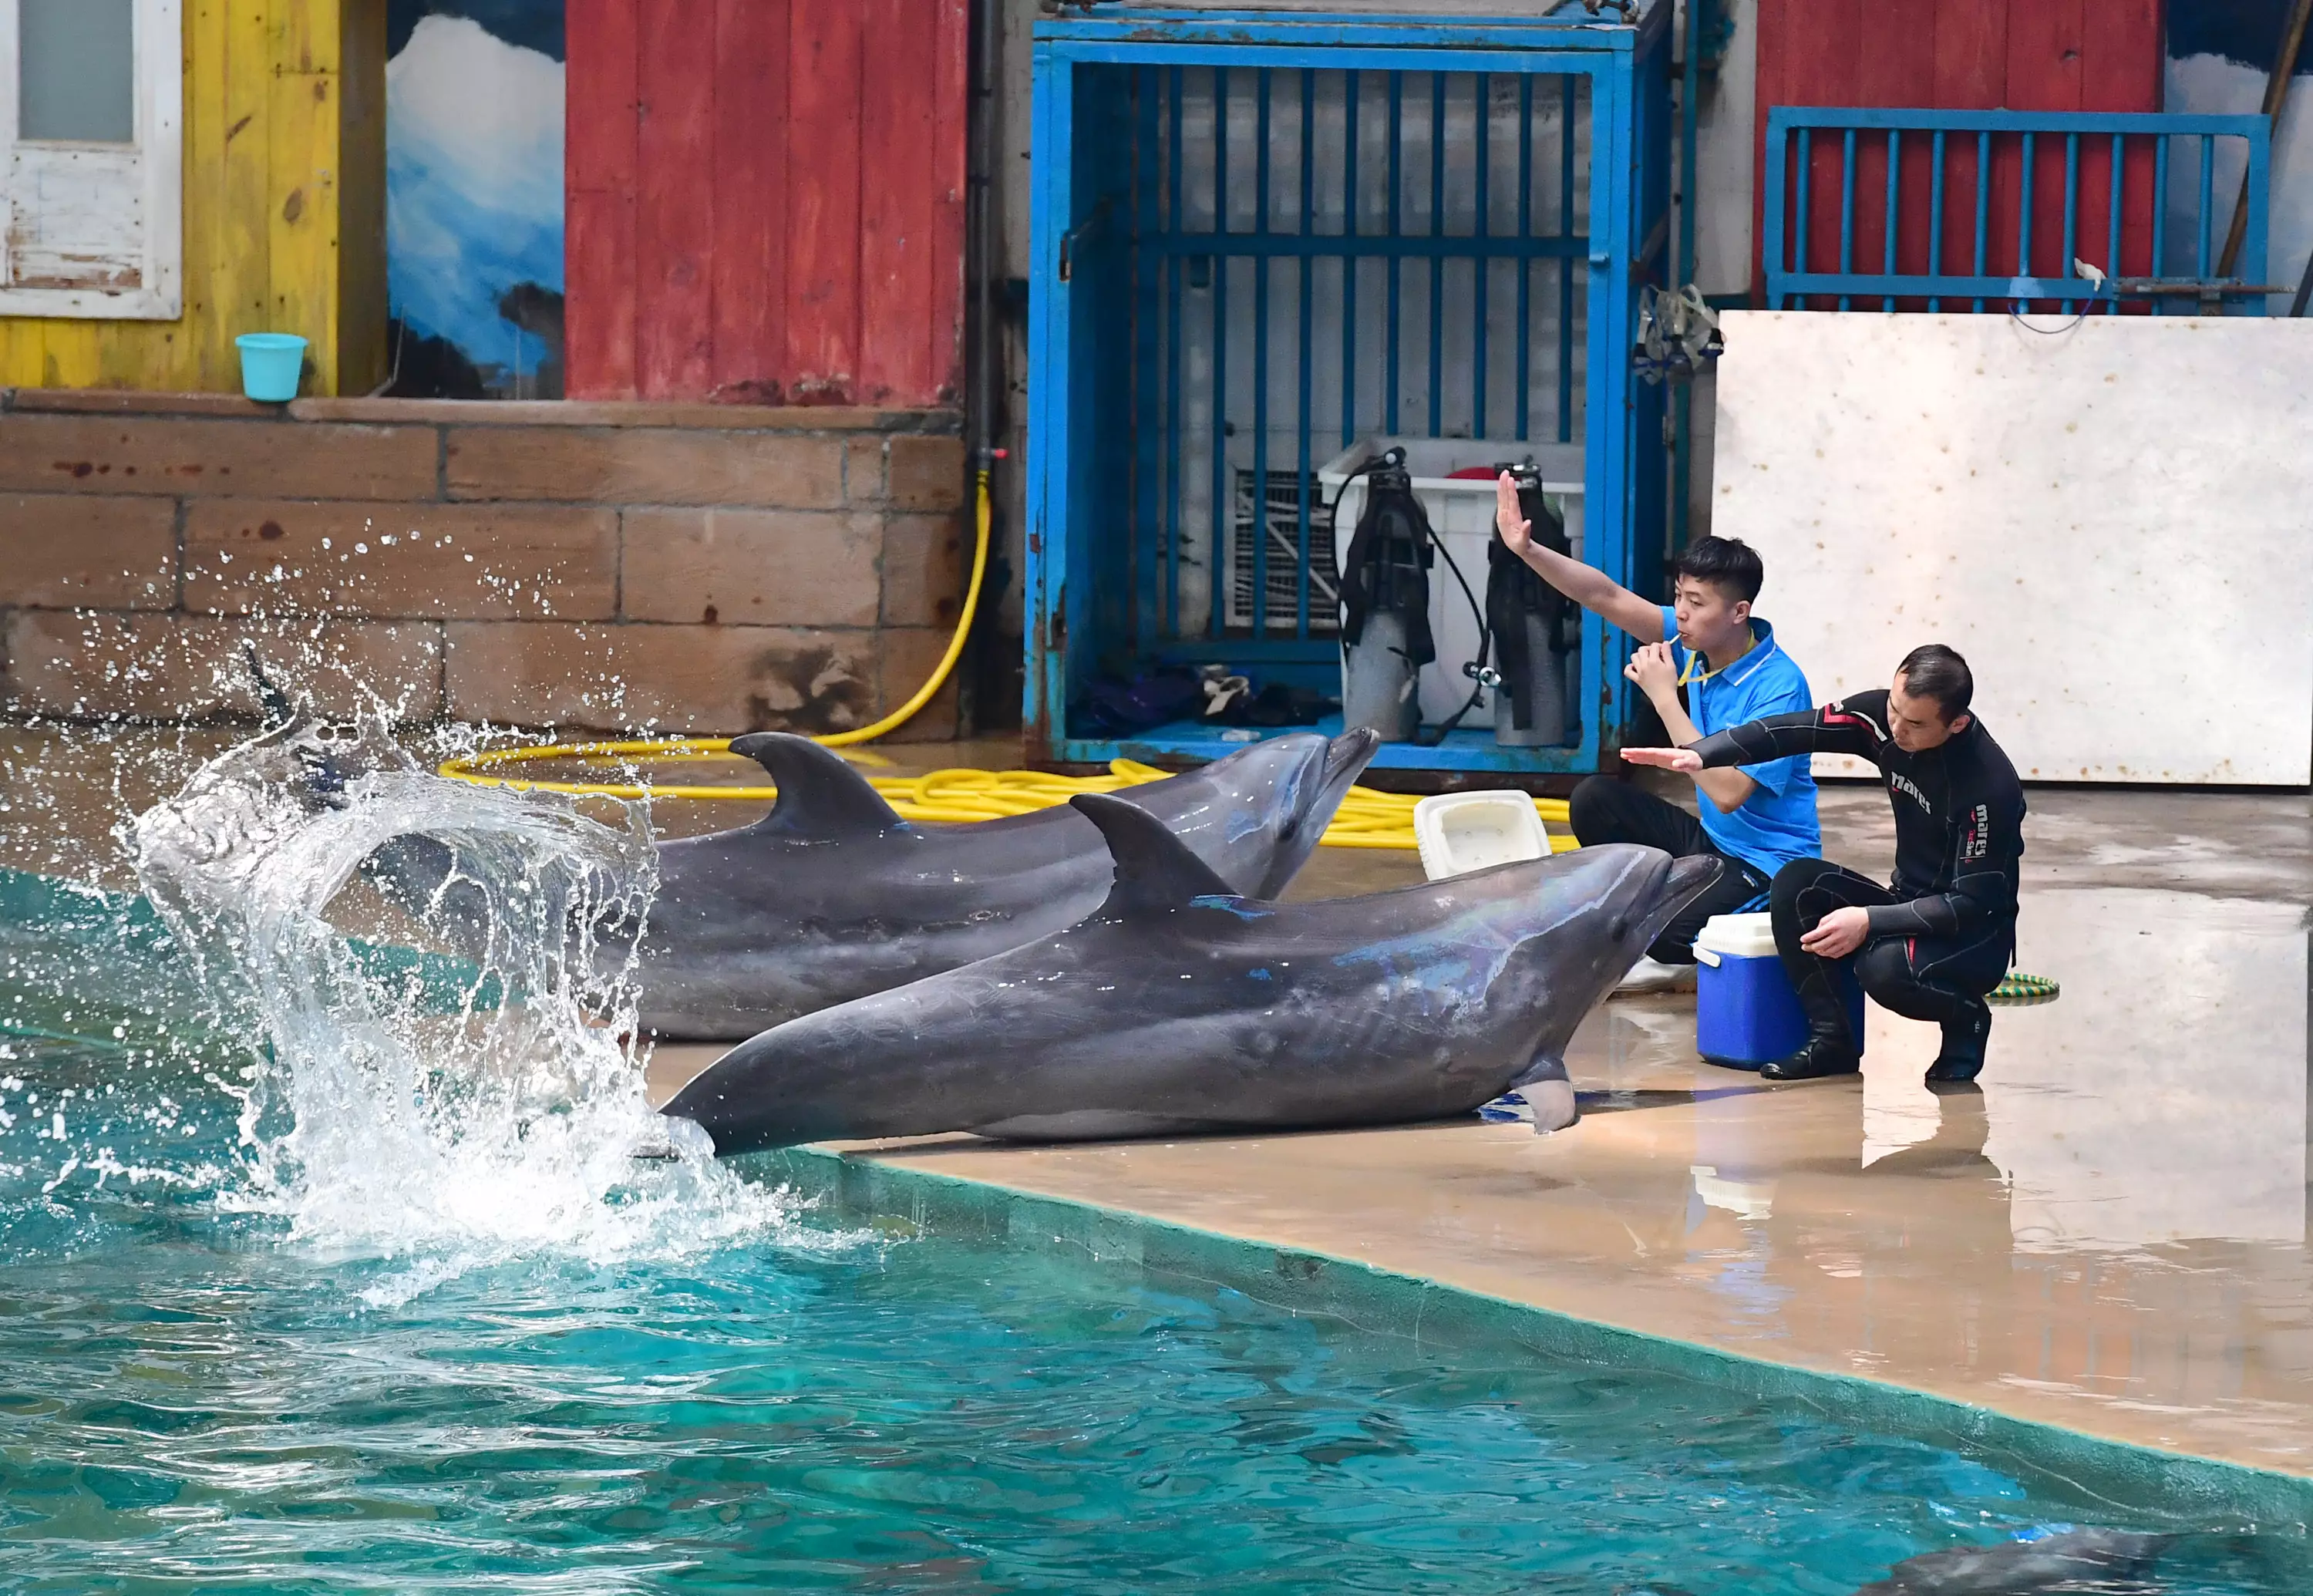 There is a growing opposition to using marine mammals in performances.